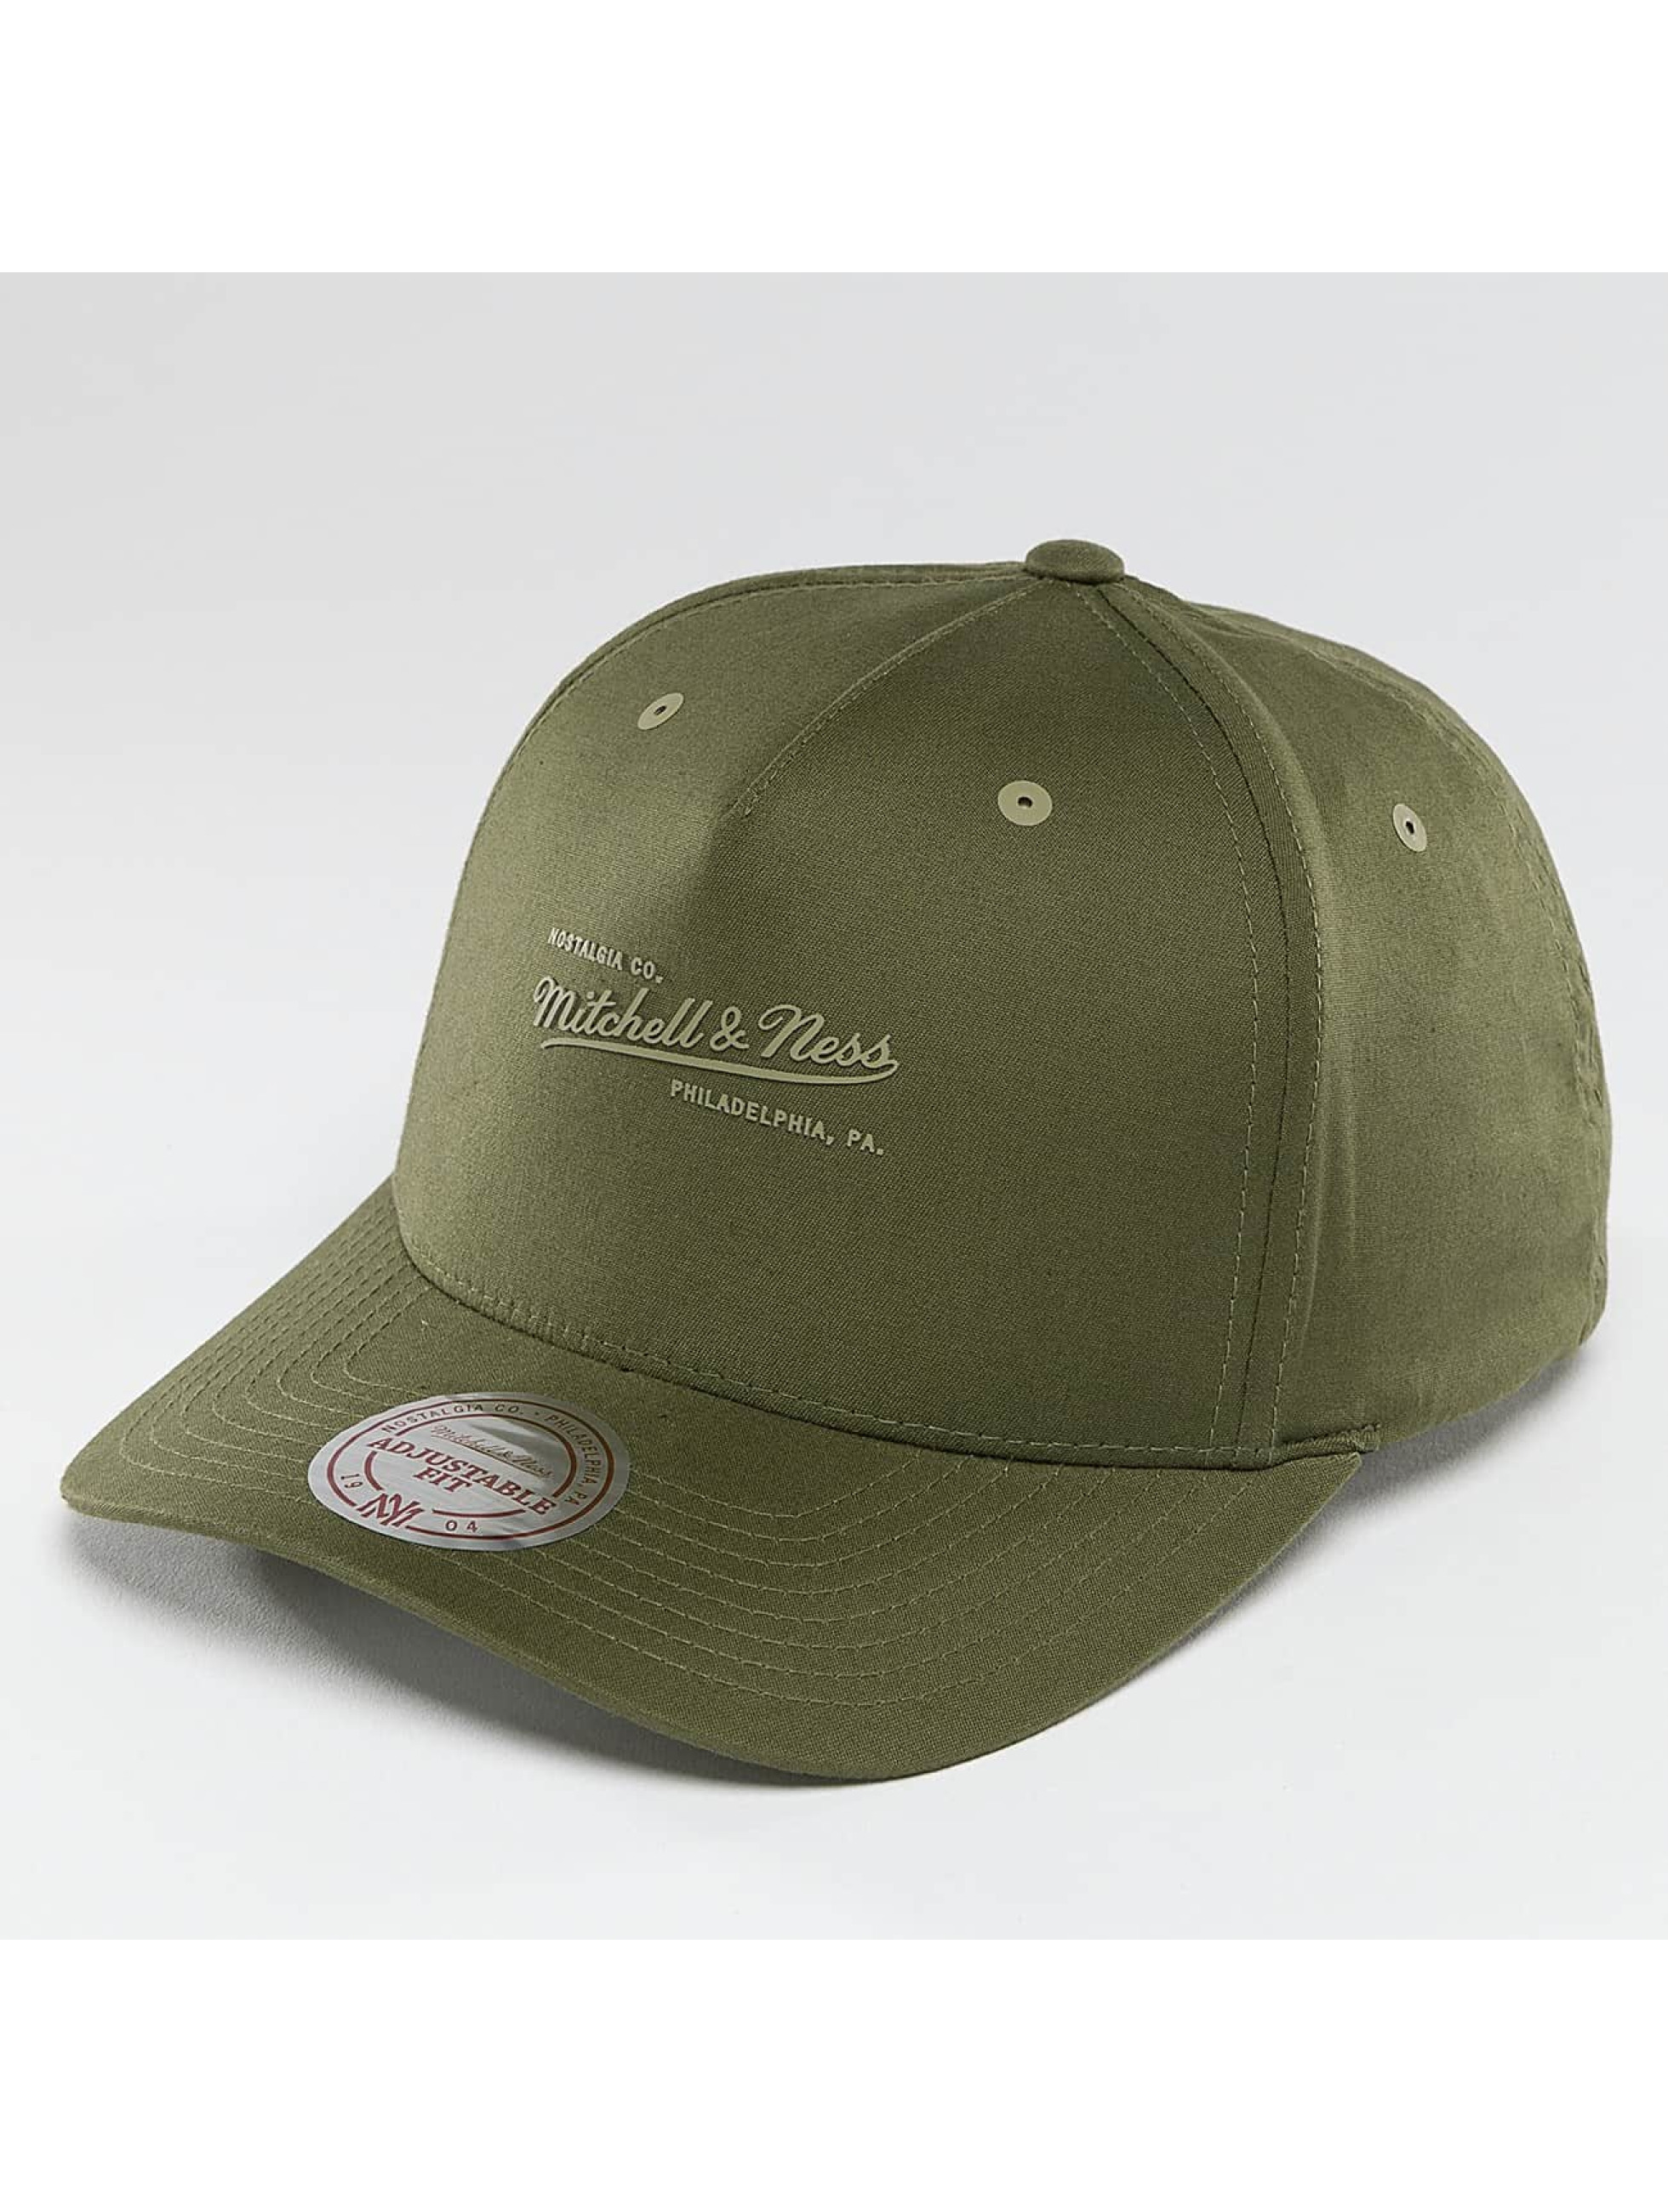 Mitchell & Ness Snapback Cap Tactical in olive